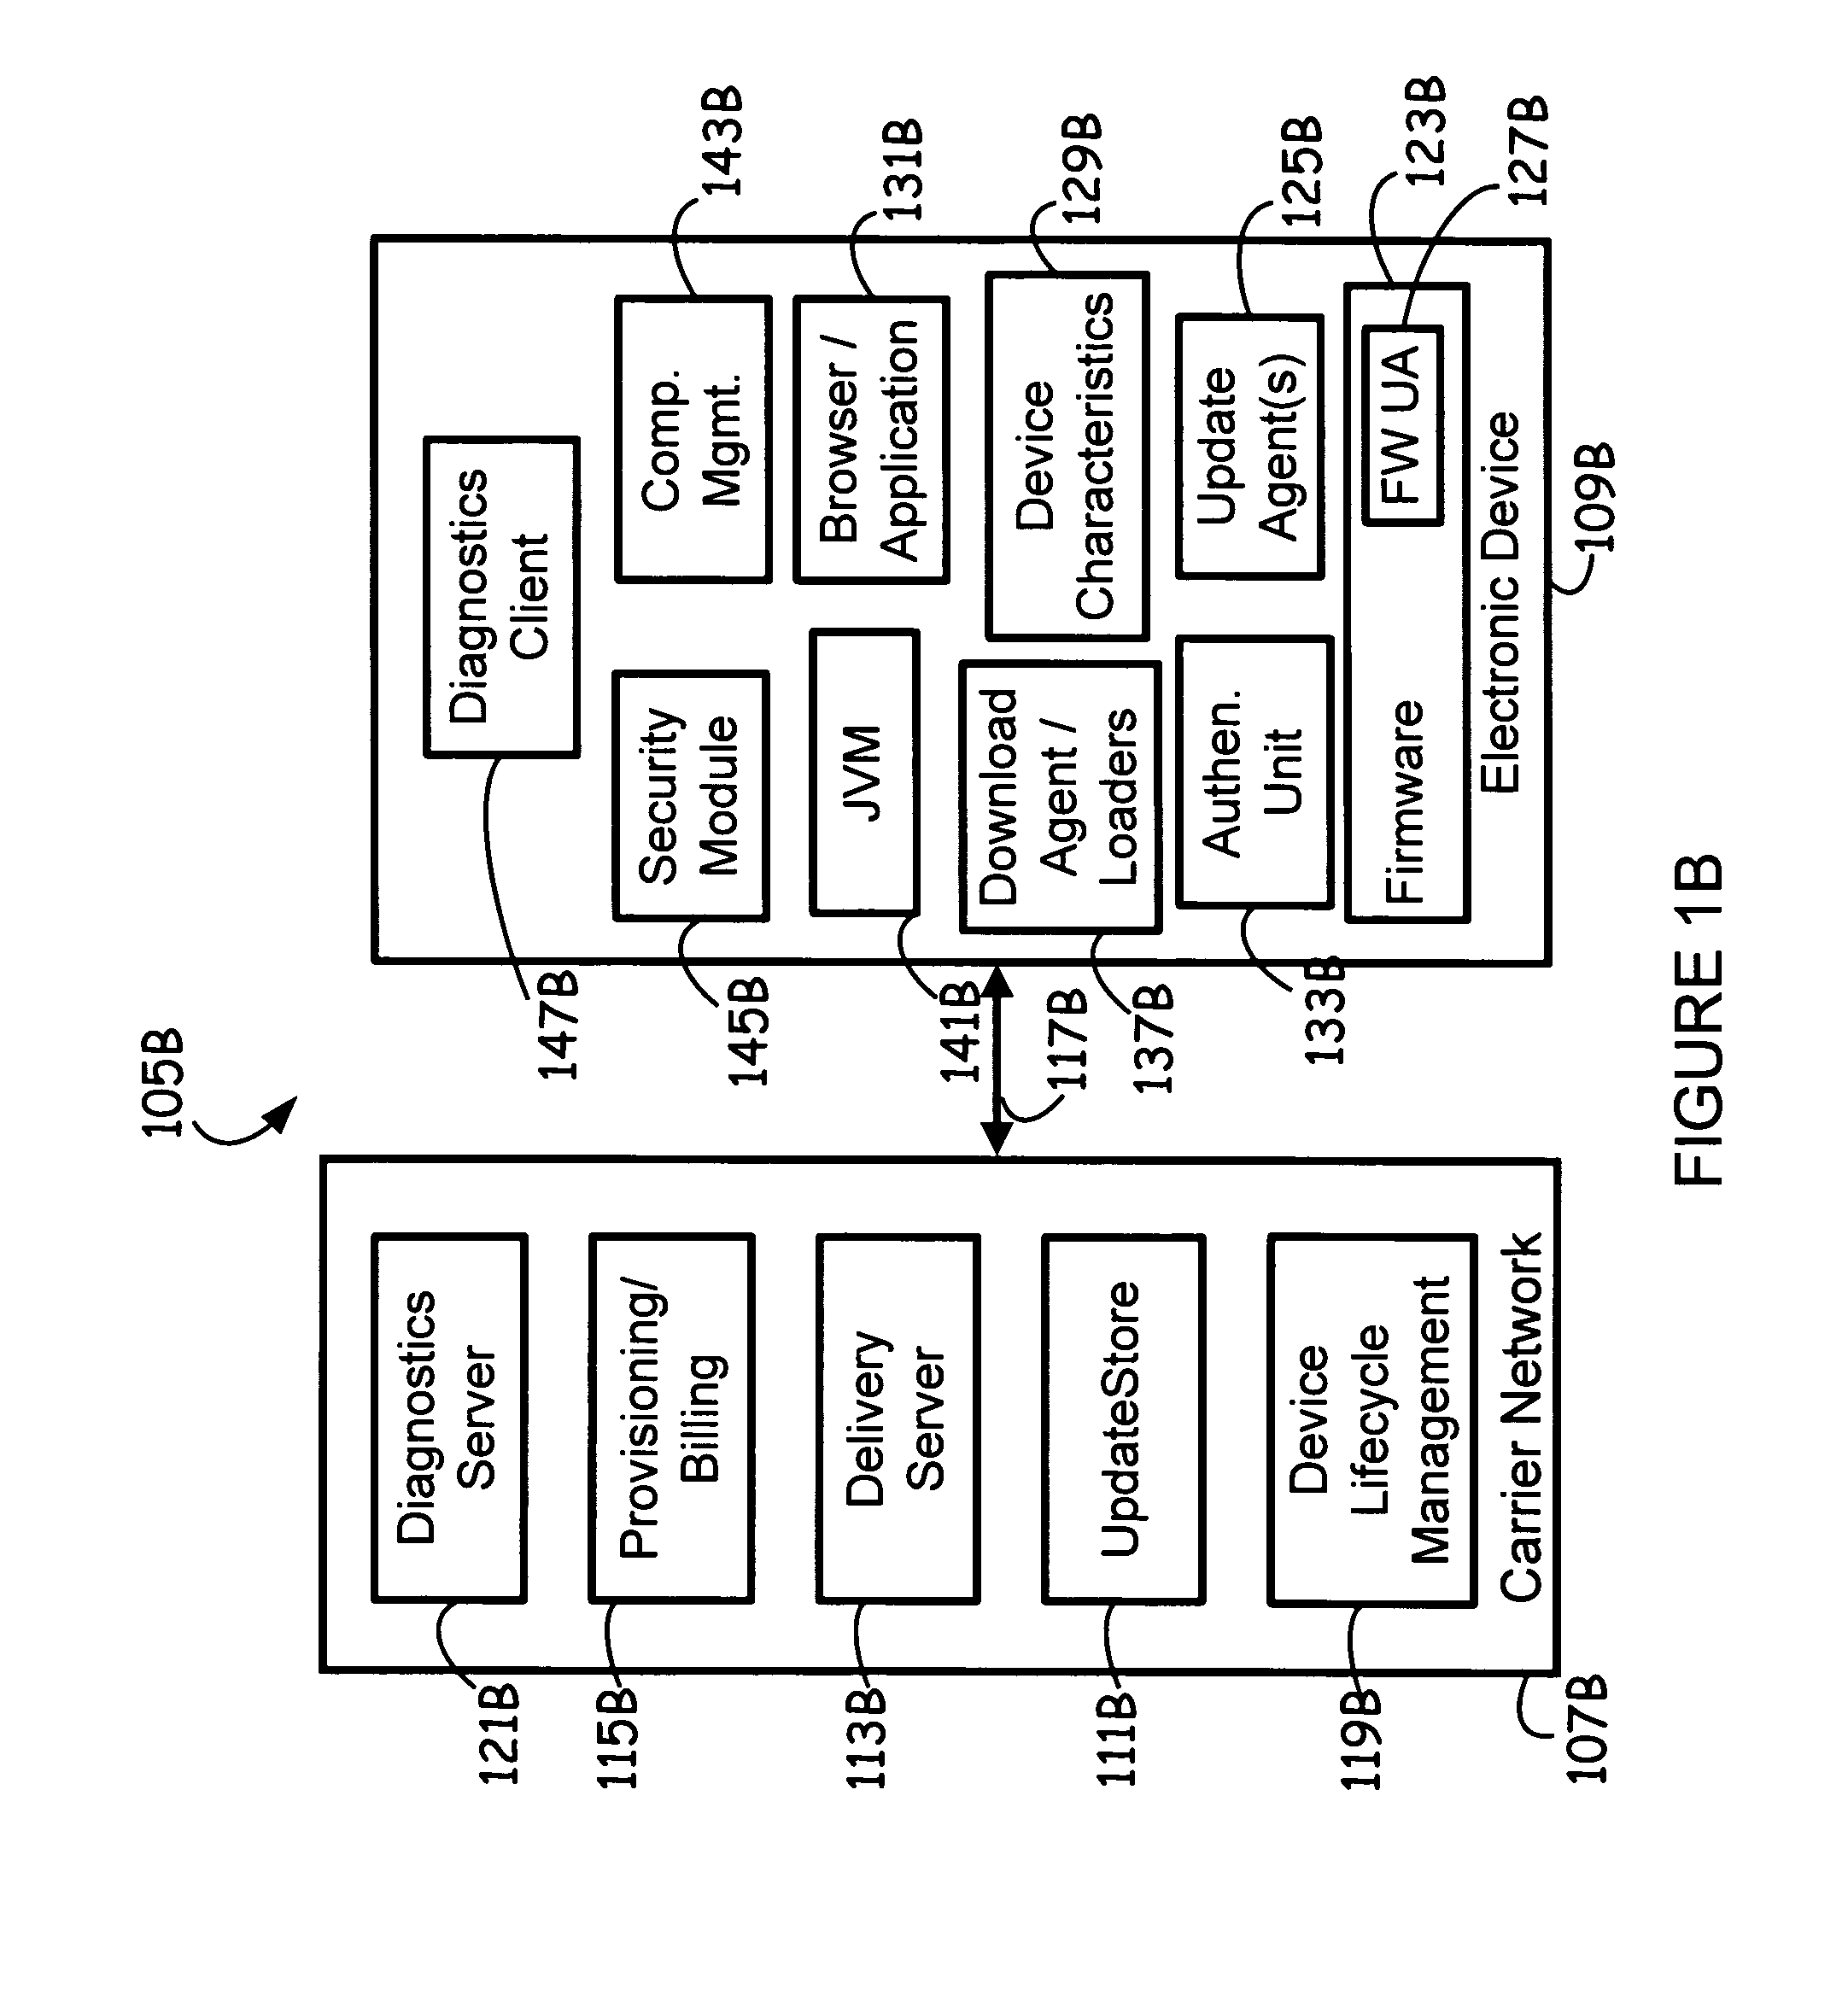 Network for updating electronic devices